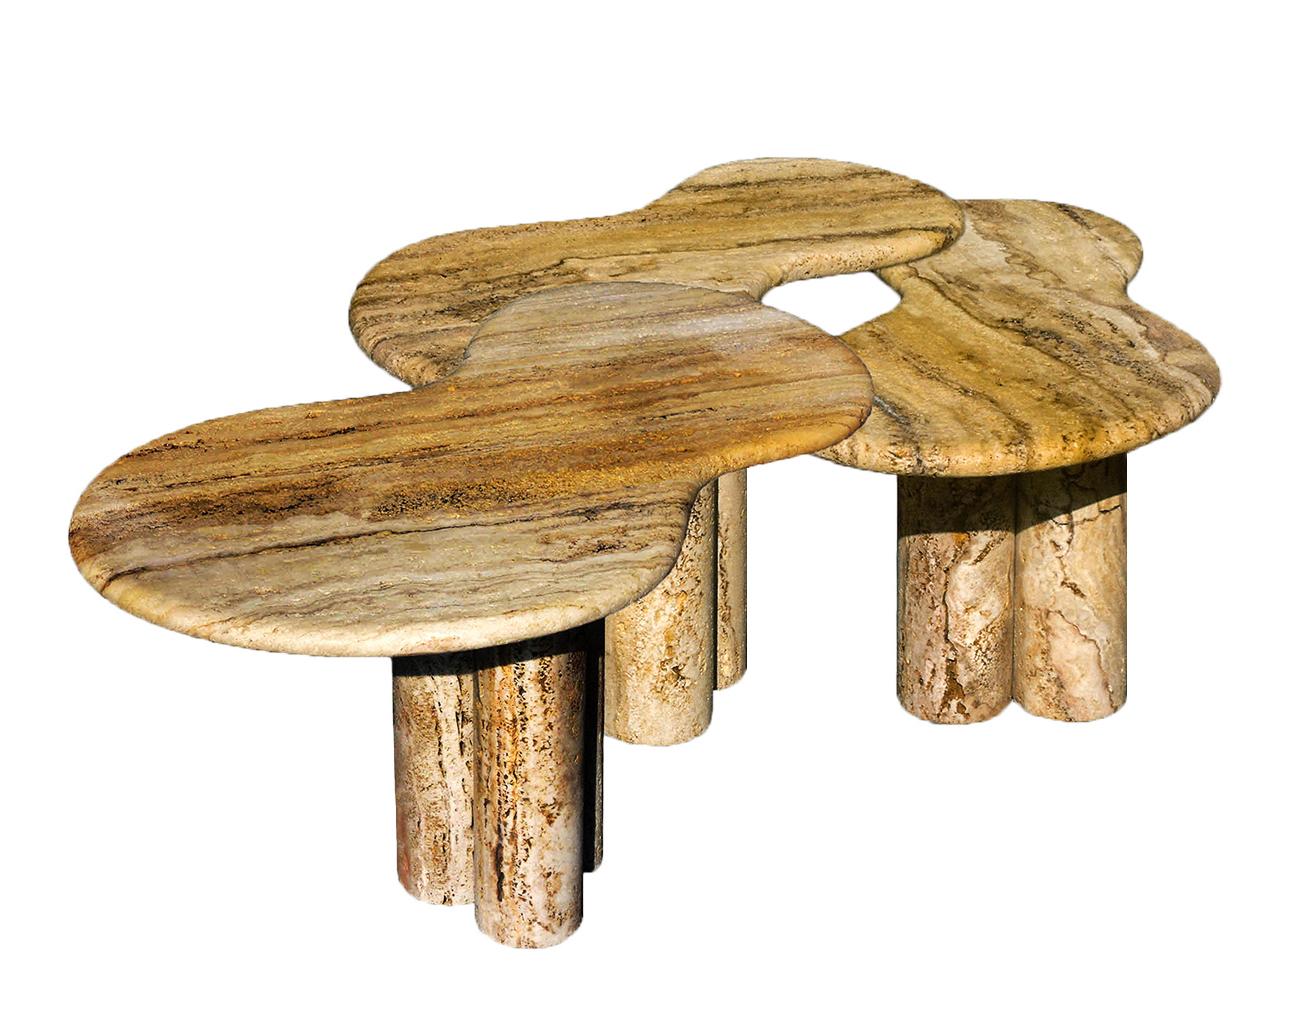 Set of 3 Covertinos nest coffee tables by Jean-Fréderic Bourdier
Dimensions: D 75 x W 45 x H 42.5 cm
D 59 x W 35 x H 37.5 cm
D 59 x W 35 x H 32.5 cm
Materials: Travertine.

Mostly guided by his sculptor skills JFB and his life time strong